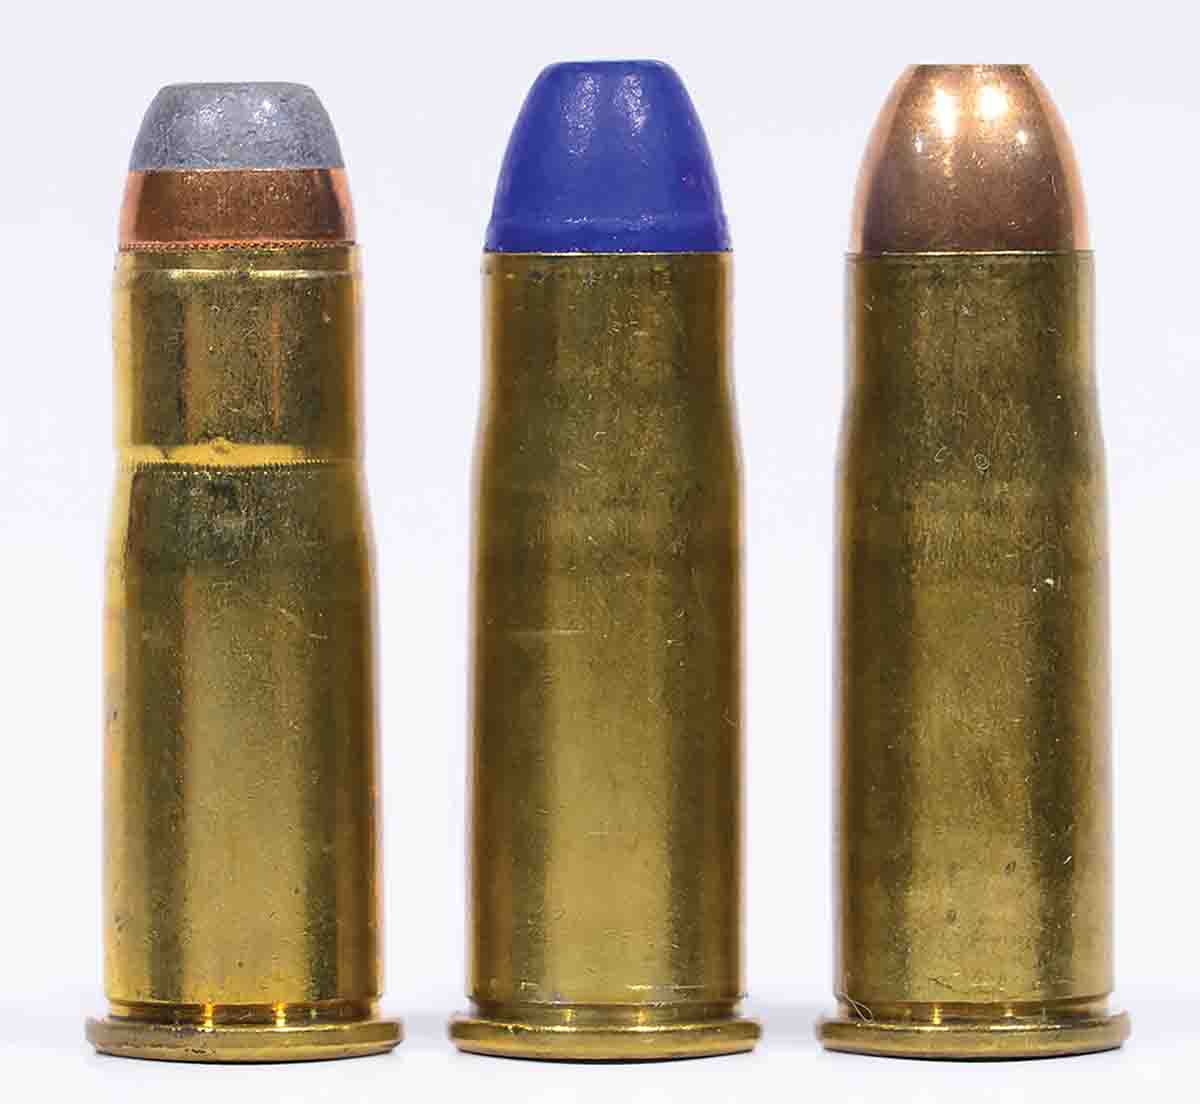 Factory loads versus handloads (left to right): a factory Winchester with a 180-grain jacketed hollowpoint, a handload with a 165-grain Blue Bullet and a 180-grain Northern Precision.